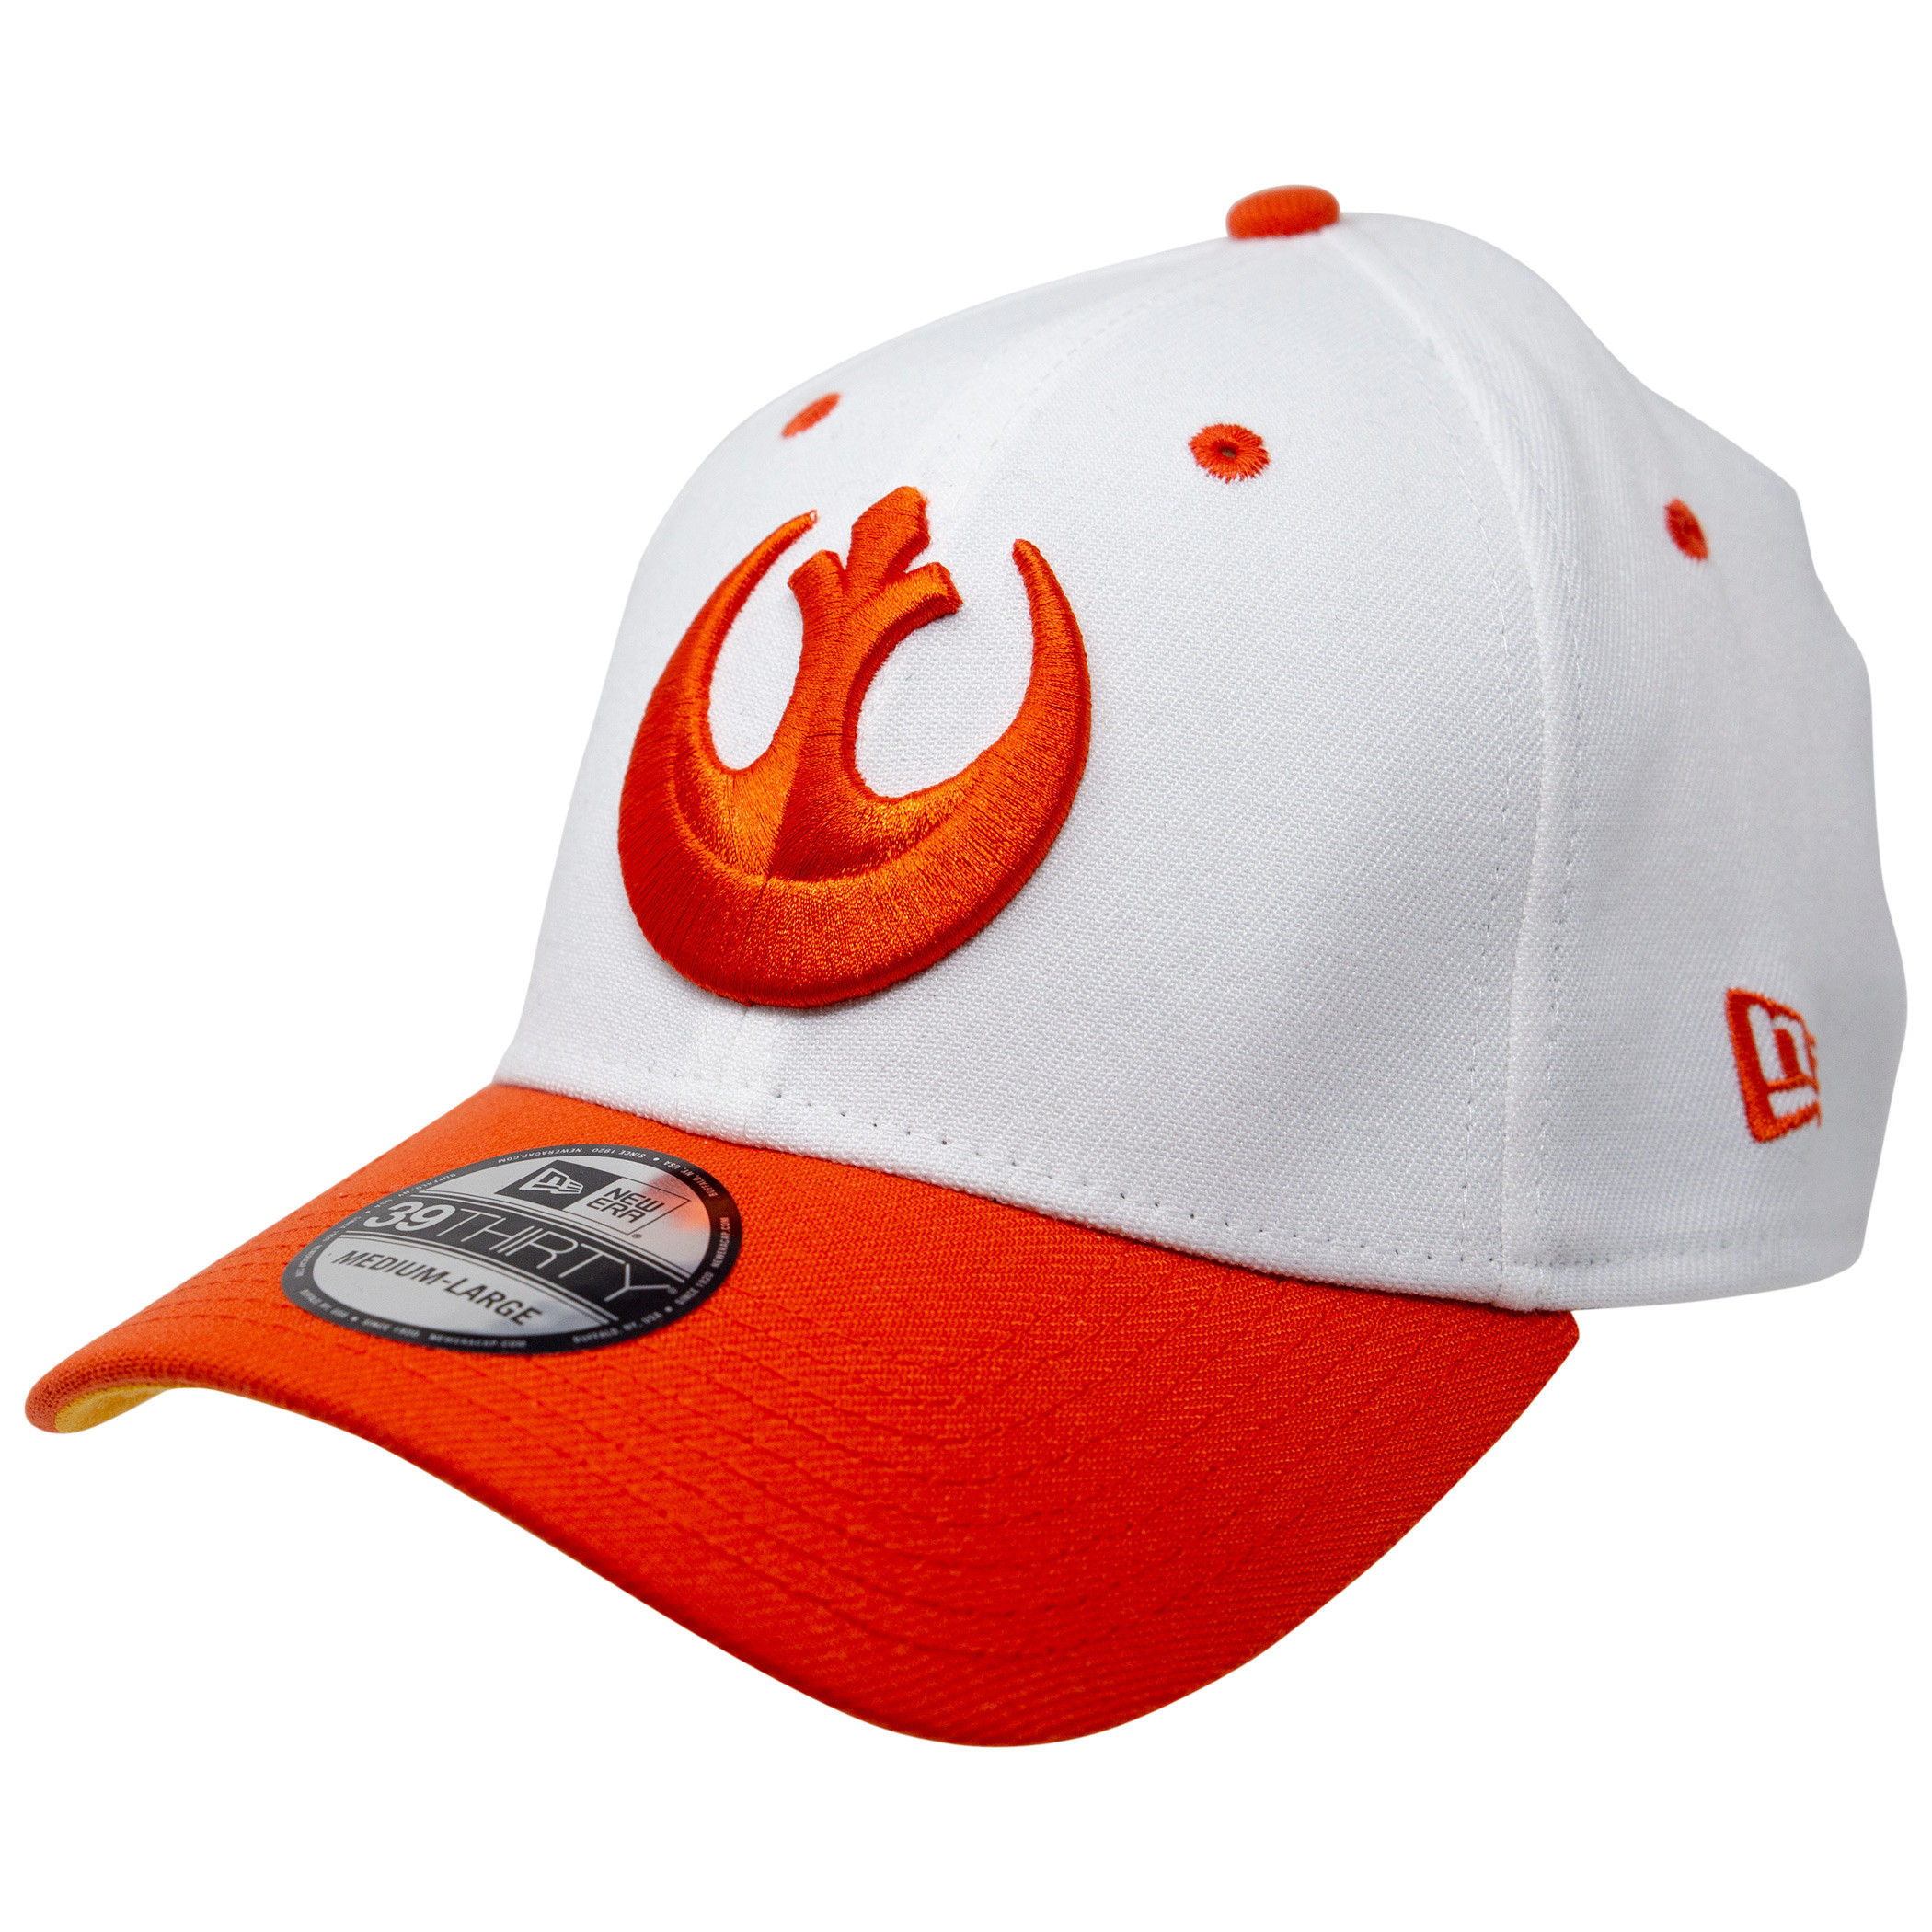 Star Wars Rebel Fighter New Era 39Thirty Fitted Hat